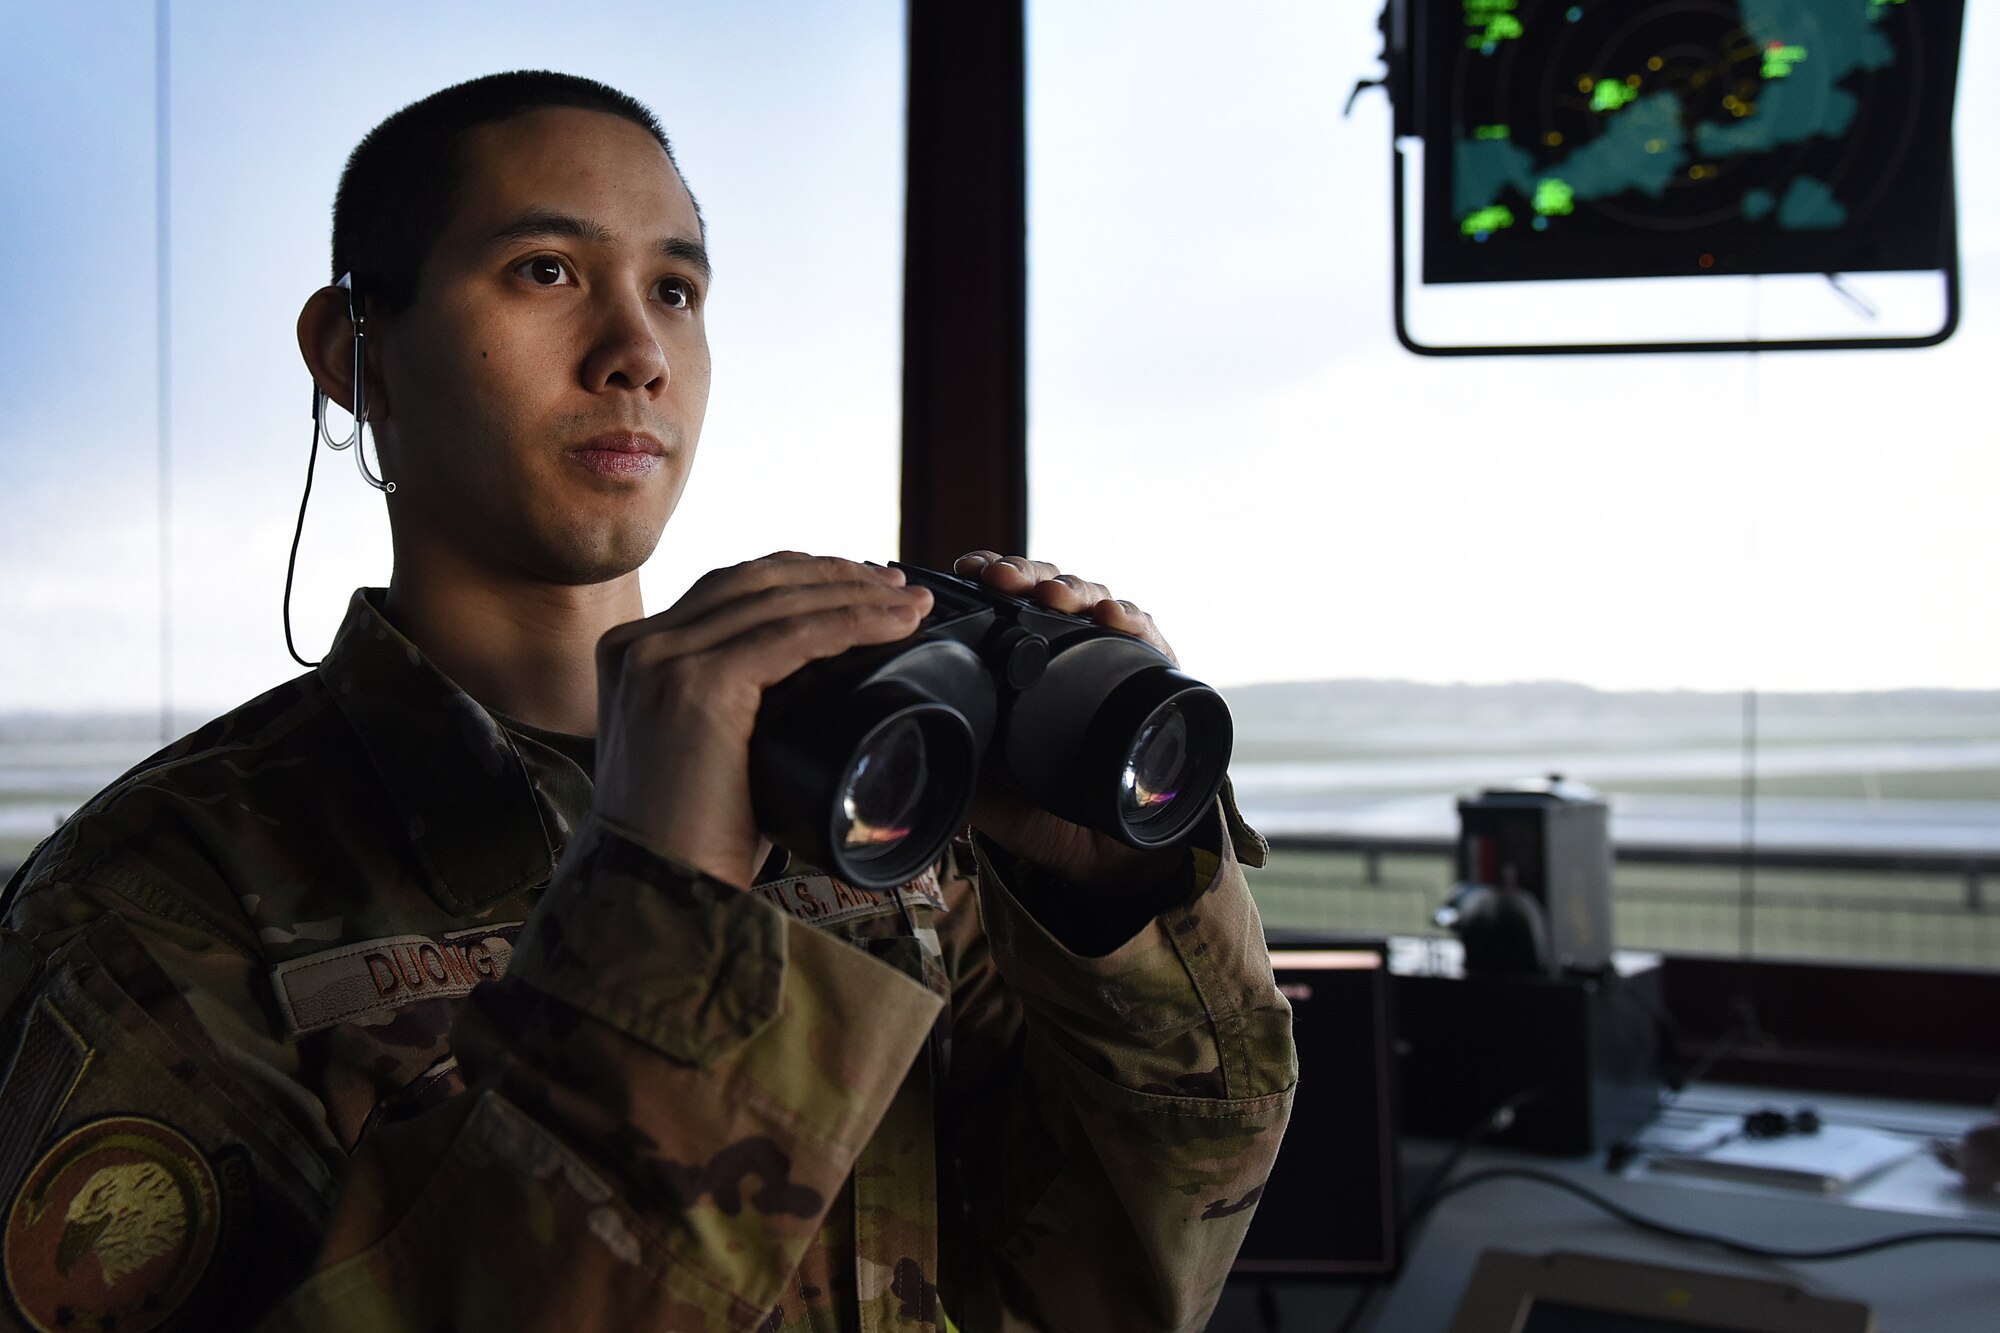 Airman 1st Class Howie Duong, 48th Operational Support Squadron air traffic controller, watches for aircraft preparing to depart at Royal Air Force Lakenheath, England, Feb. 25, 2020. Air traffic controllers are responsible for managing the flow of aircraft through all aspects of their flight and ensuring the safety and efficiency of air traffic on the ground and in the air. (U.S. Air Force photo by Airman 1st Class Jessi Monte)